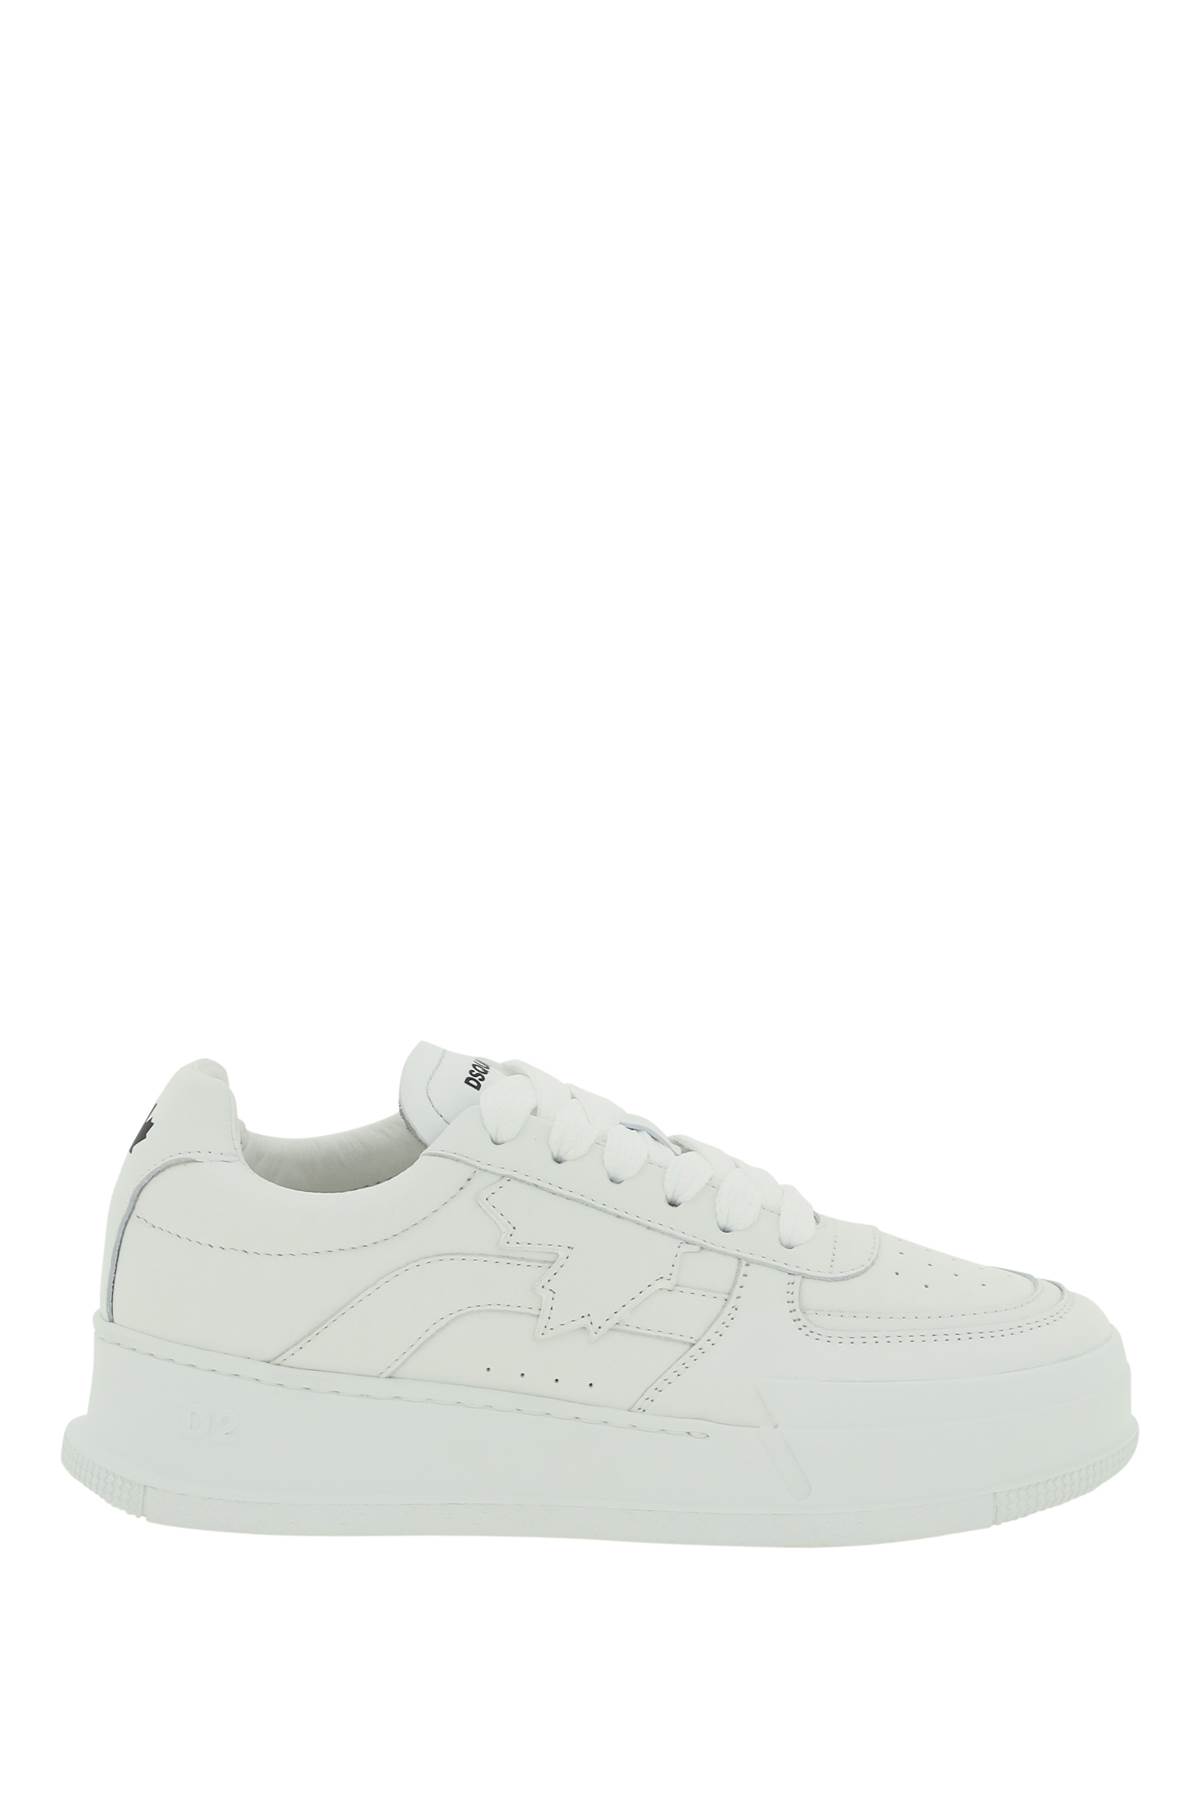 DSQUARED2 LEATHER CANADIAN SNEAKERS